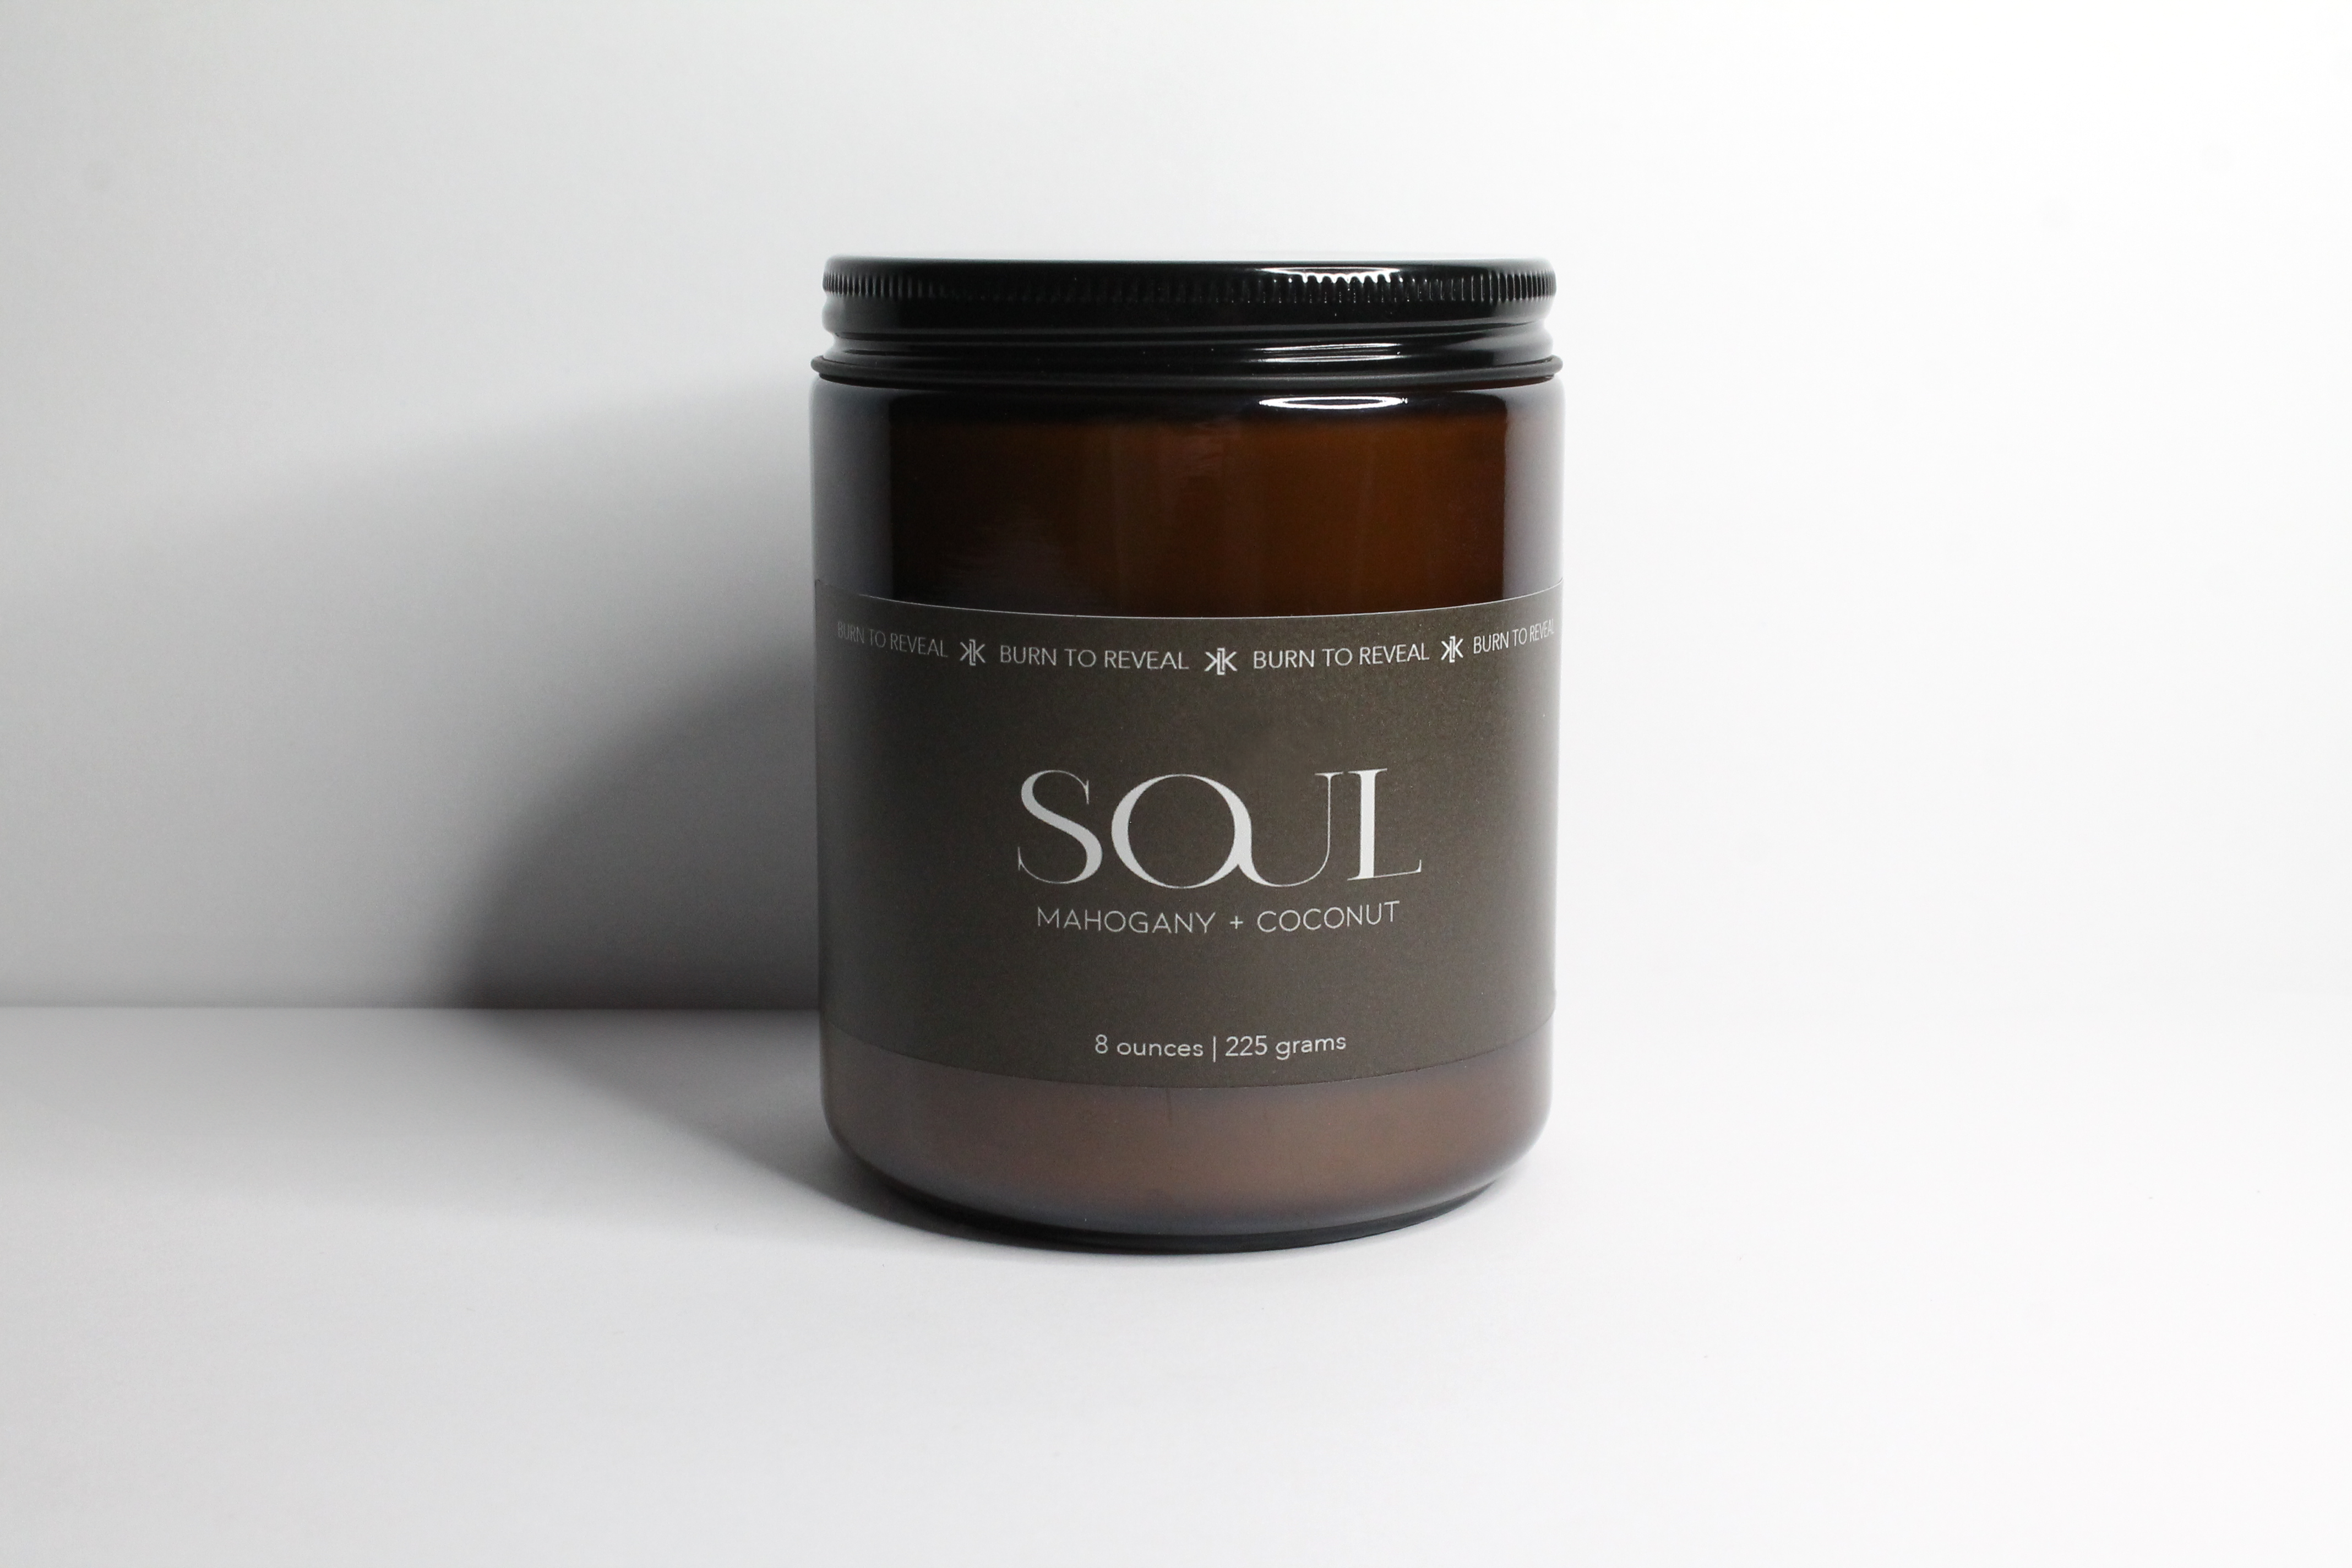 Mahogany and coconut scented soy candle in a 8 ounce amber glass jar.